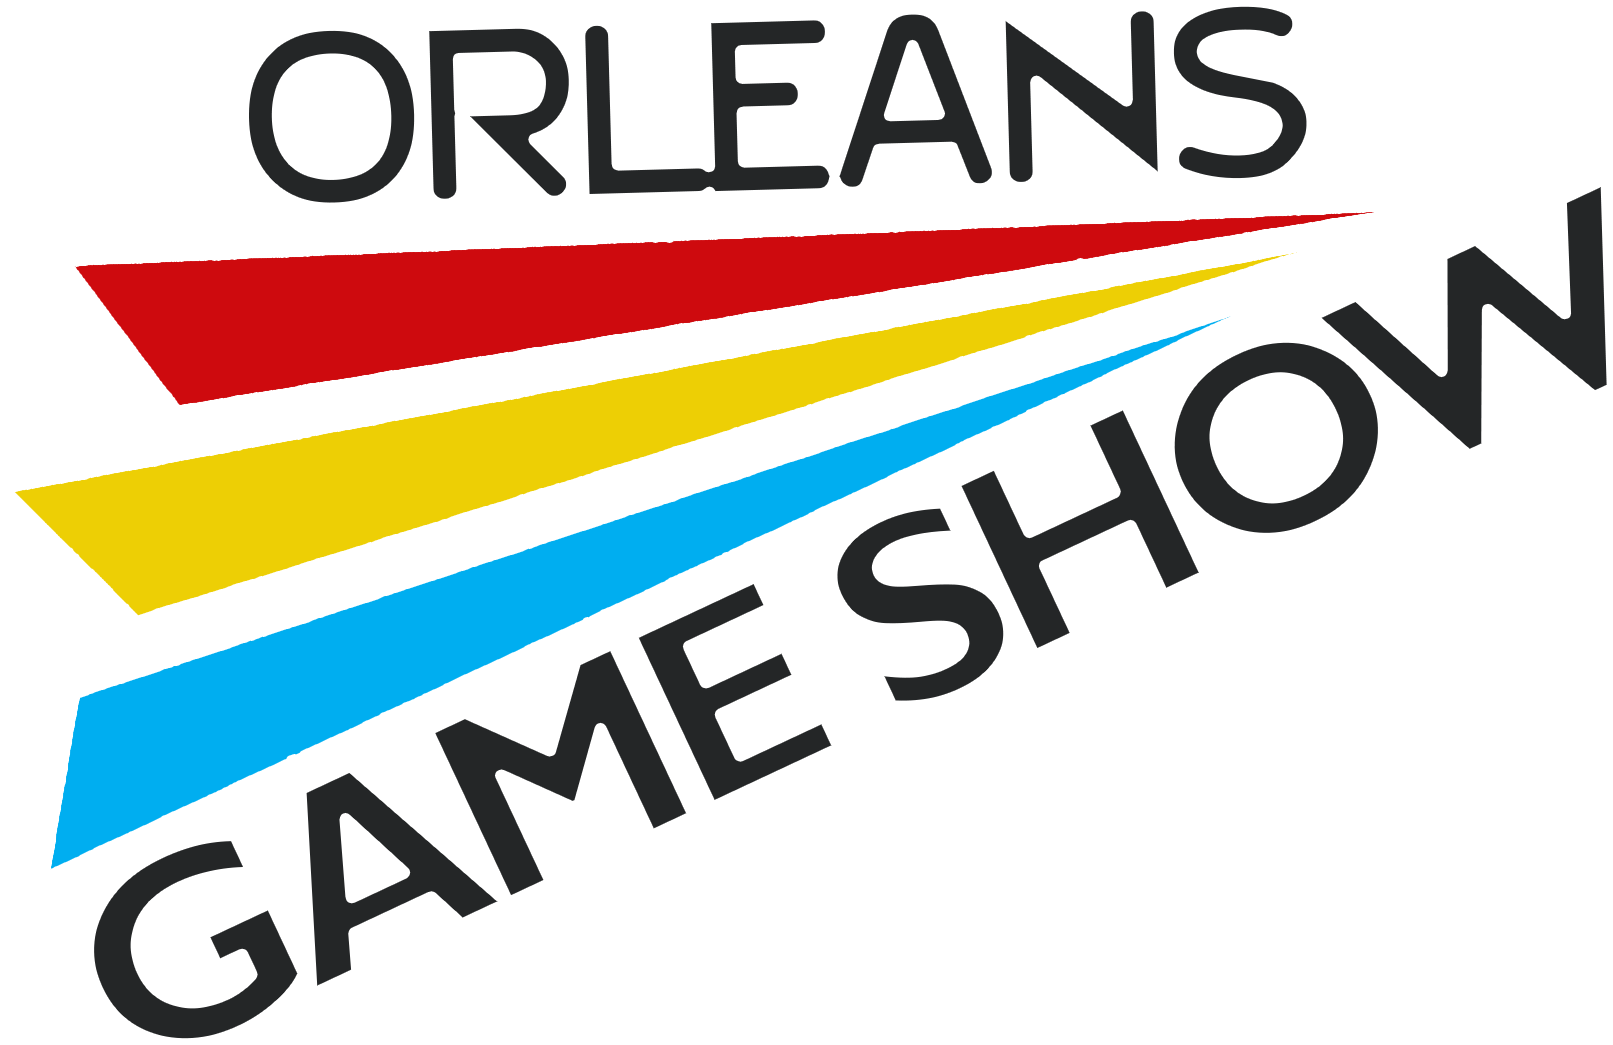 ORLÉANS GAME SHOW